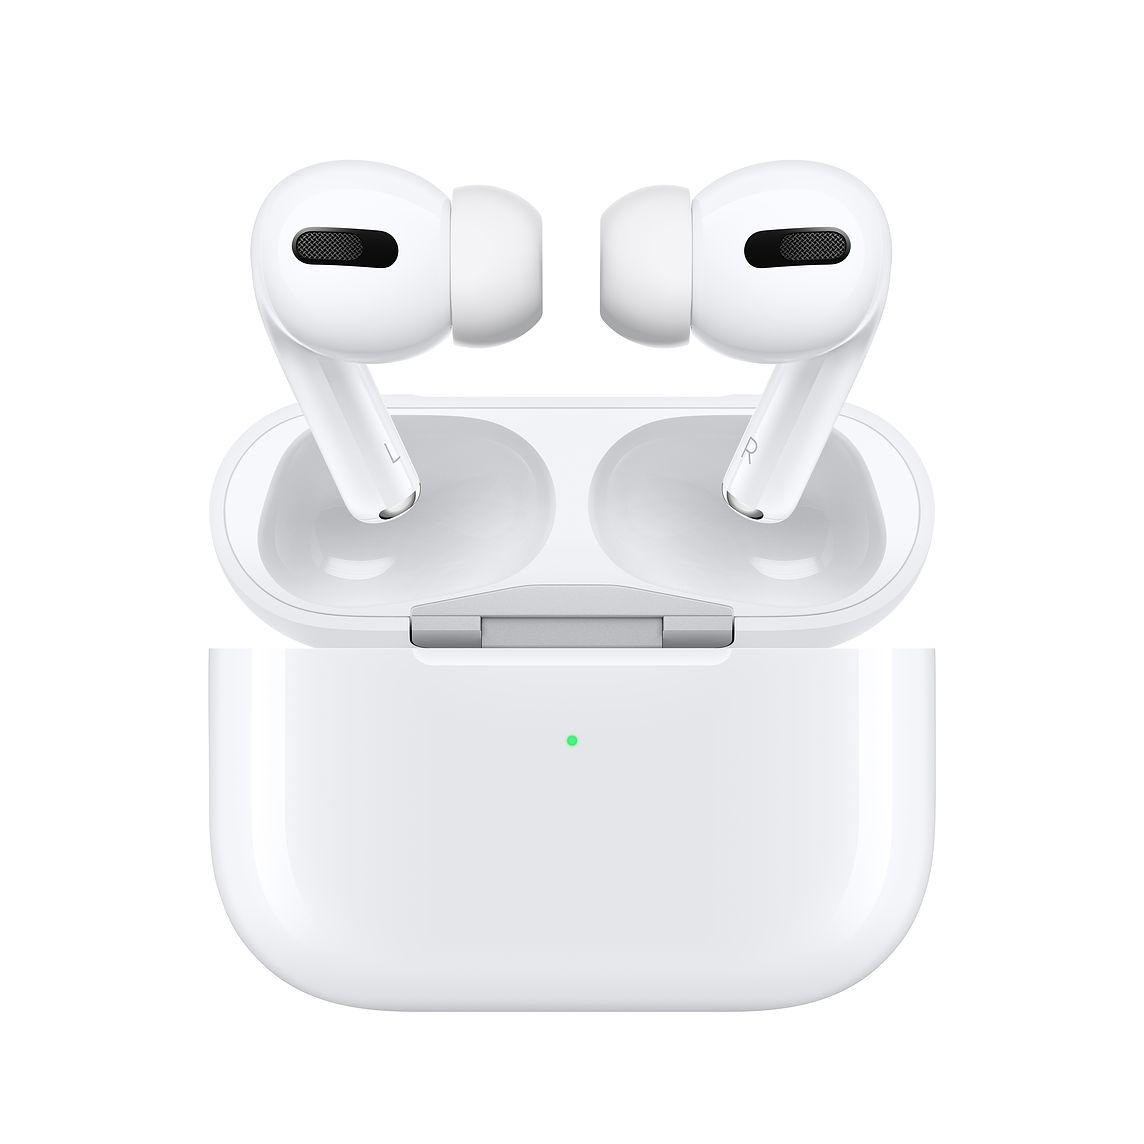 Airpods pro copy price in Pakistan